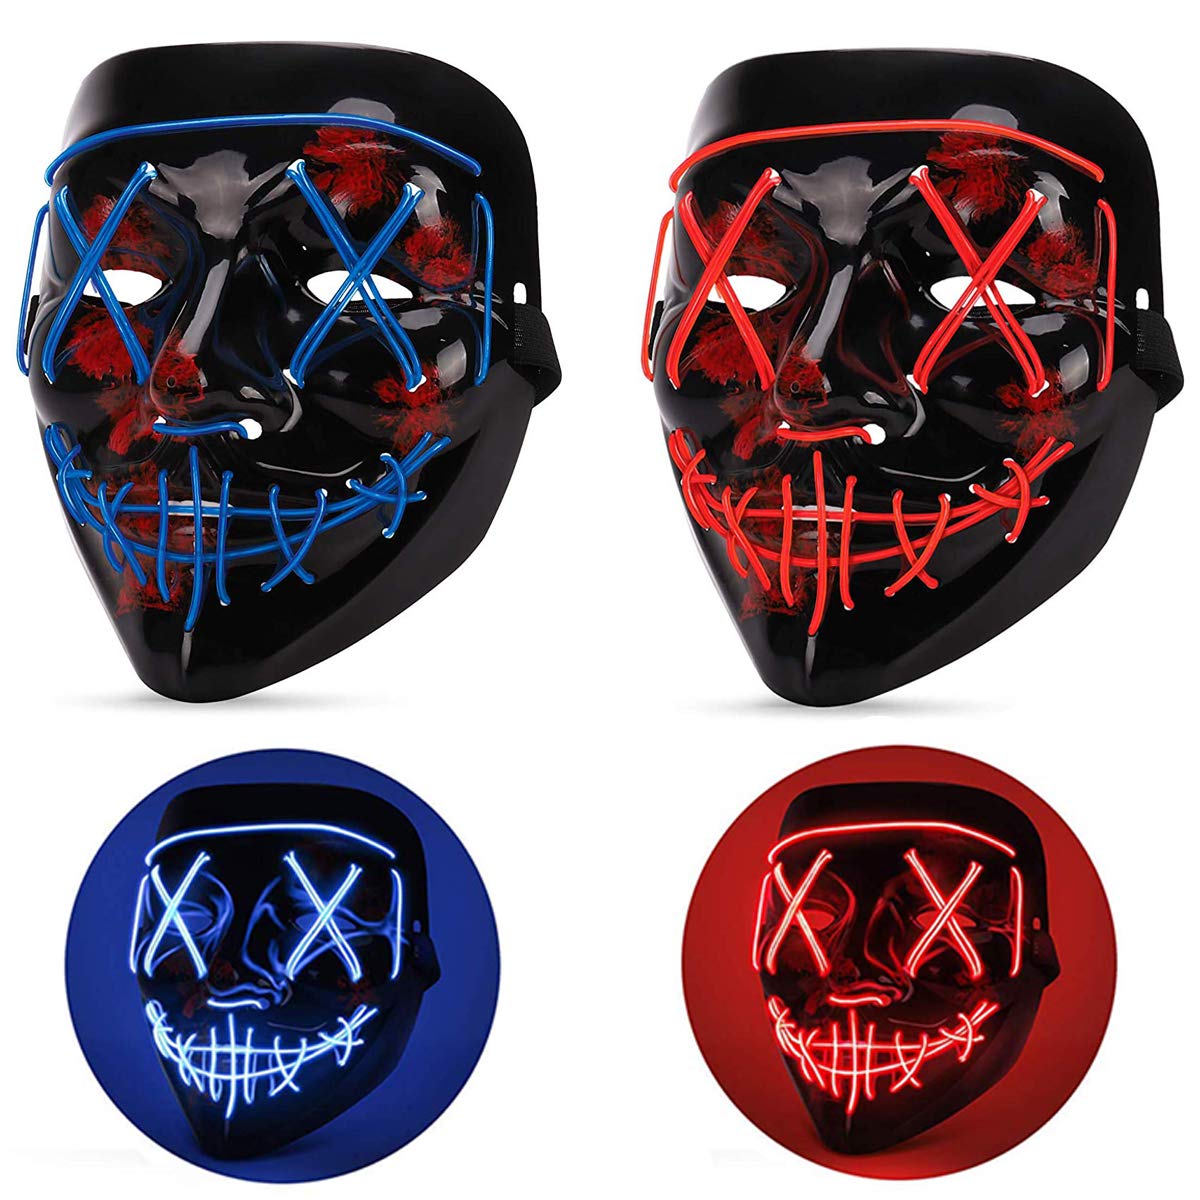 Halloween Mask LED Light up Mask (2 Pack) Scary mask for Festival Cosplay Halloween Costume Masquerade Parties,Carnival